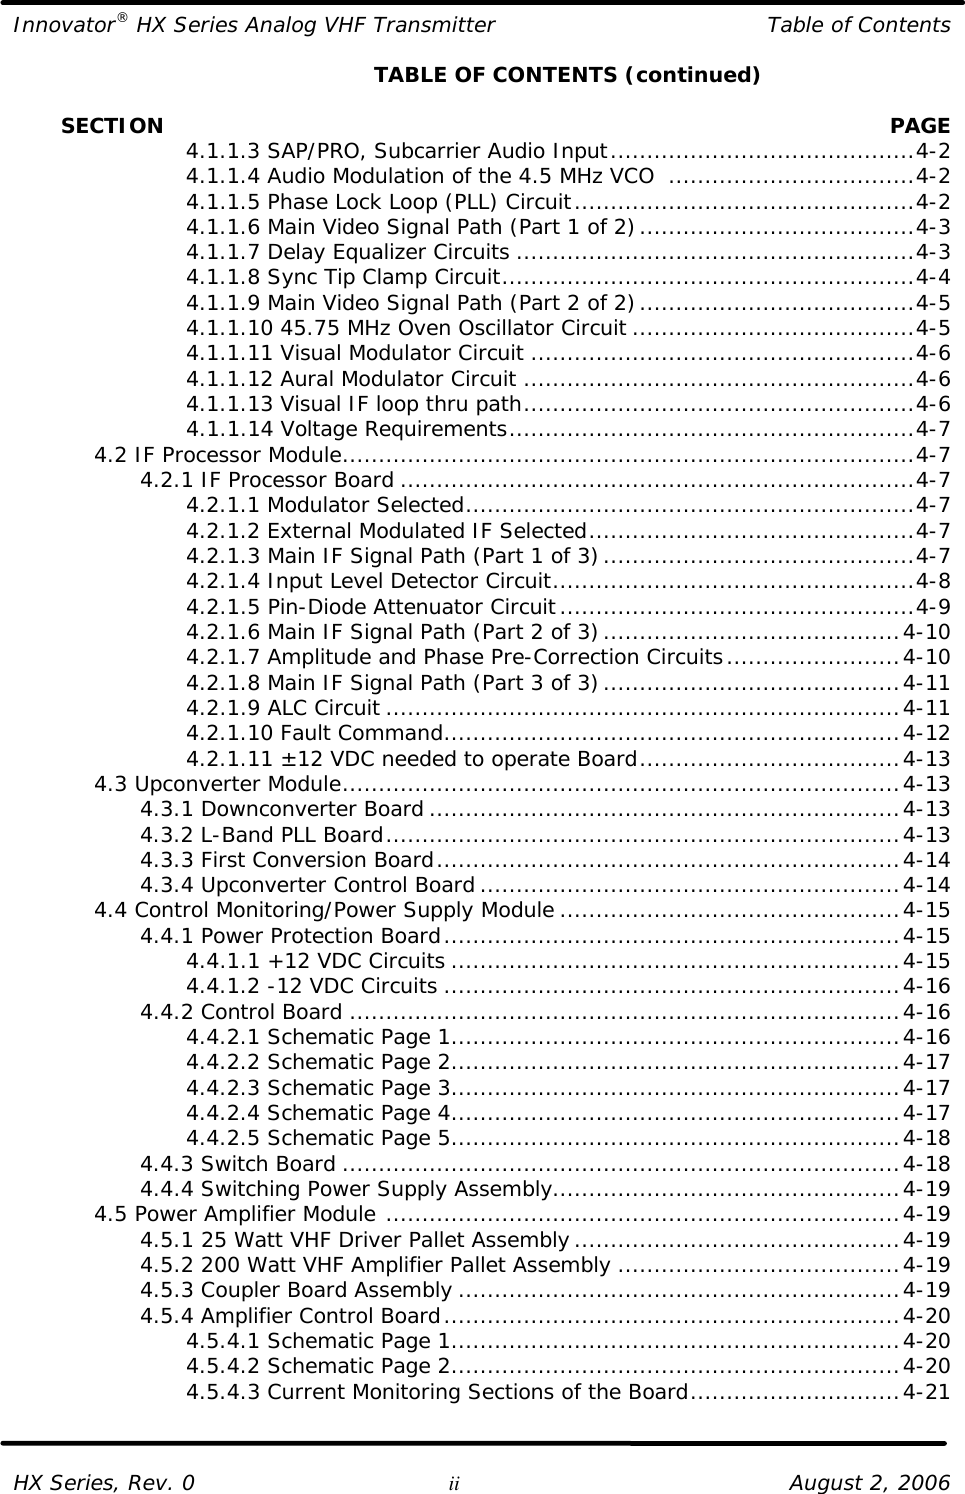 Innovator® HX Series Analog VHF Transmitter Table of Contents  HX Series, Rev. 0 ii August 2, 2006     TABLE OF CONTENTS (continued)         SECTION    PAGE     4.1.1.3 SAP/PRO, Subcarrier Audio Input..........................................4-2     4.1.1.4 Audio Modulation of the 4.5 MHz VCO  ..................................4-2     4.1.1.5 Phase Lock Loop (PLL) Circuit...............................................4-2     4.1.1.6 Main Video Signal Path (Part 1 of 2)......................................4-3     4.1.1.7 Delay Equalizer Circuits .......................................................4-3     4.1.1.8 Sync Tip Clamp Circuit.........................................................4-4     4.1.1.9 Main Video Signal Path (Part 2 of 2)......................................4-5     4.1.1.10 45.75 MHz Oven Oscillator Circuit .......................................4-5     4.1.1.11 Visual Modulator Circuit .....................................................4-6     4.1.1.12 Aural Modulator Circuit ......................................................4-6     4.1.1.13 Visual IF loop thru path......................................................4-6     4.1.1.14 Voltage Requirements........................................................4-7  4.2 IF Processor Module...............................................................................4-7     4.2.1 IF Processor Board .......................................................................4-7     4.2.1.1 Modulator Selected..............................................................4-7     4.2.1.2 External Modulated IF Selected.............................................4-7     4.2.1.3 Main IF Signal Path (Part 1 of 3)...........................................4-7     4.2.1.4 Input Level Detector Circuit..................................................4-8     4.2.1.5 Pin-Diode Attenuator Circuit.................................................4-9     4.2.1.6 Main IF Signal Path (Part 2 of 3).........................................4-10     4.2.1.7 Amplitude and Phase Pre-Correction Circuits........................4-10     4.2.1.8 Main IF Signal Path (Part 3 of 3).........................................4-11     4.2.1.9 ALC Circuit .......................................................................4-11     4.2.1.10 Fault Command...............................................................4-12     4.2.1.11 ±12 VDC needed to operate Board....................................4-13  4.3 Upconverter Module.............................................................................4-13     4.3.1 Downconverter Board .................................................................4-13     4.3.2 L-Band PLL Board.......................................................................4-13     4.3.3 First Conversion Board................................................................4-14     4.3.4 Upconverter Control Board ..........................................................4-14  4.4 Control Monitoring/Power Supply Module ...............................................4-15     4.4.1 Power Protection Board...............................................................4-15     4.4.1.1 +12 VDC Circuits ..............................................................4-15     4.4.1.2 -12 VDC Circuits ...............................................................4-16     4.4.2 Control Board ............................................................................4-16     4.4.2.1 Schematic Page 1..............................................................4-16     4.4.2.2 Schematic Page 2..............................................................4-17     4.4.2.3 Schematic Page 3..............................................................4-17     4.4.2.4 Schematic Page 4..............................................................4-17     4.4.2.5 Schematic Page 5..............................................................4-18     4.4.3 Switch Board .............................................................................4-18     4.4.4 Switching Power Supply Assembly................................................4-19  4.5 Power Amplifier Module .......................................................................4-19     4.5.1 25 Watt VHF Driver Pallet Assembly.............................................4-19     4.5.2 200 Watt VHF Amplifier Pallet Assembly .......................................4-19     4.5.3 Coupler Board Assembly .............................................................4-19     4.5.4 Amplifier Control Board...............................................................4-20     4.5.4.1 Schematic Page 1..............................................................4-20     4.5.4.2 Schematic Page 2..............................................................4-20     4.5.4.3 Current Monitoring Sections of the Board.............................4-21   